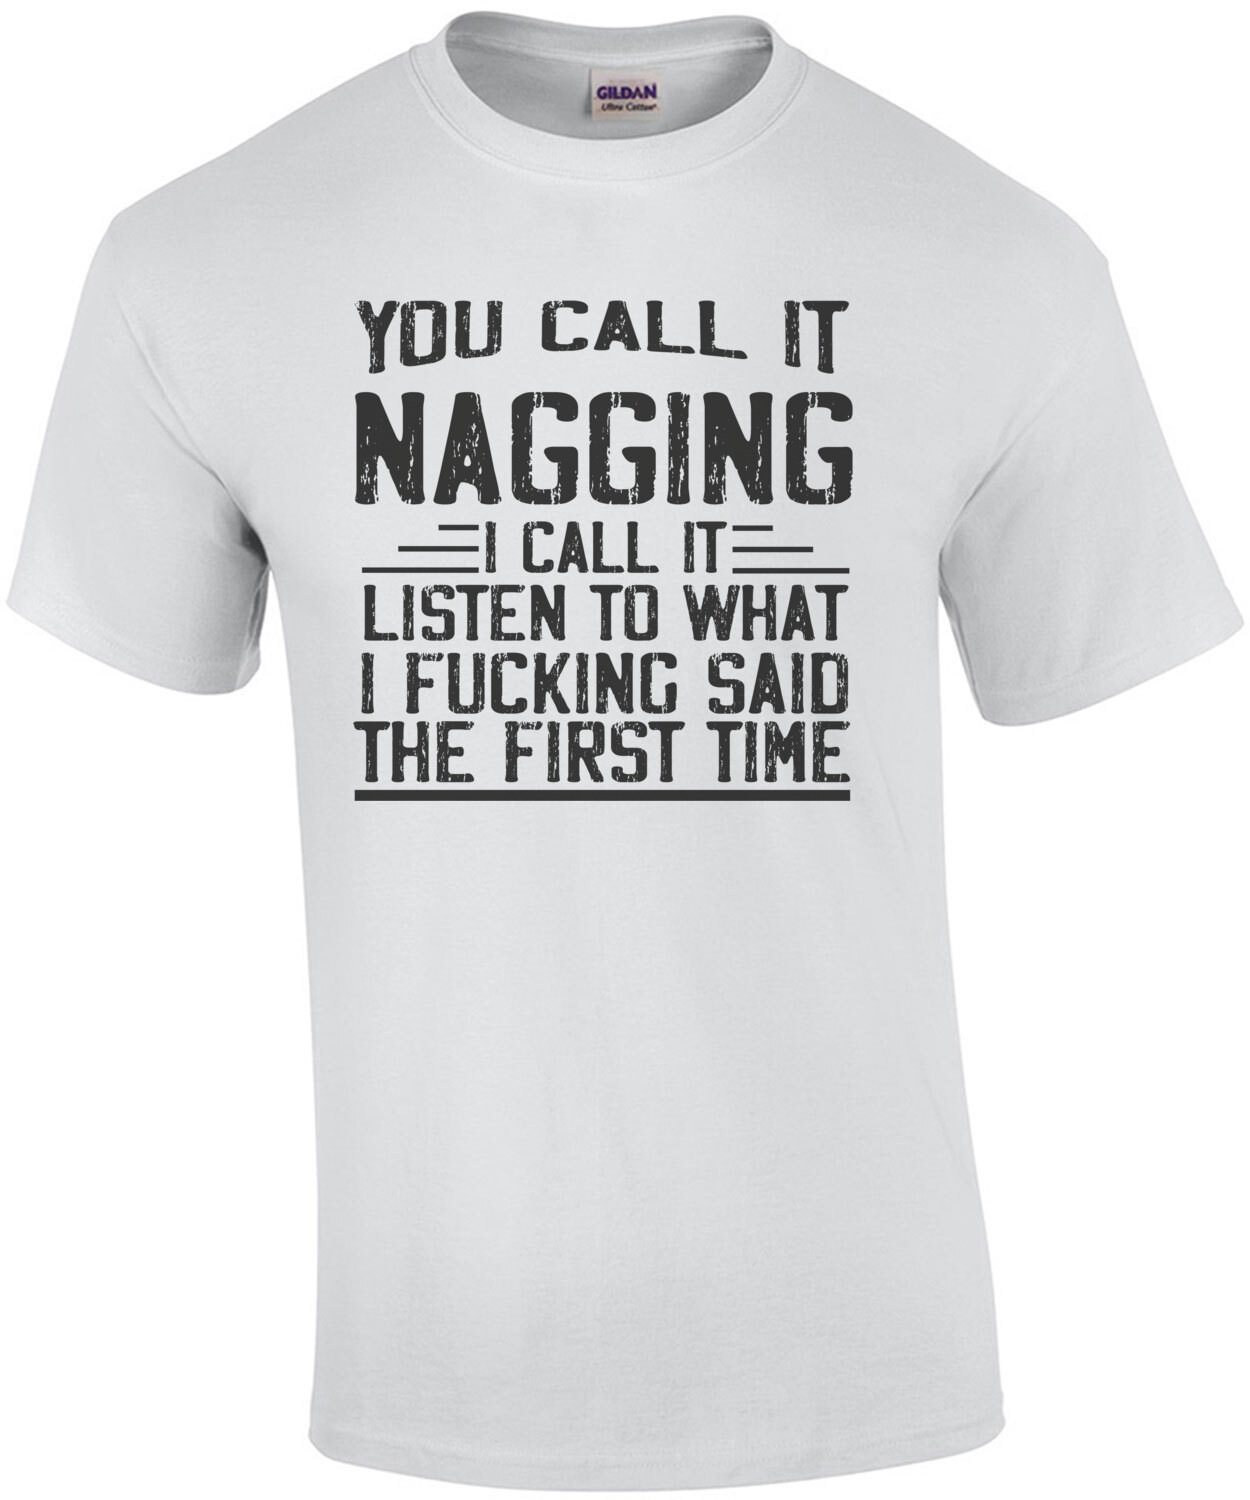 You call it nagging I call it listen to what I fucking said the first time - funny relationship t-shirt